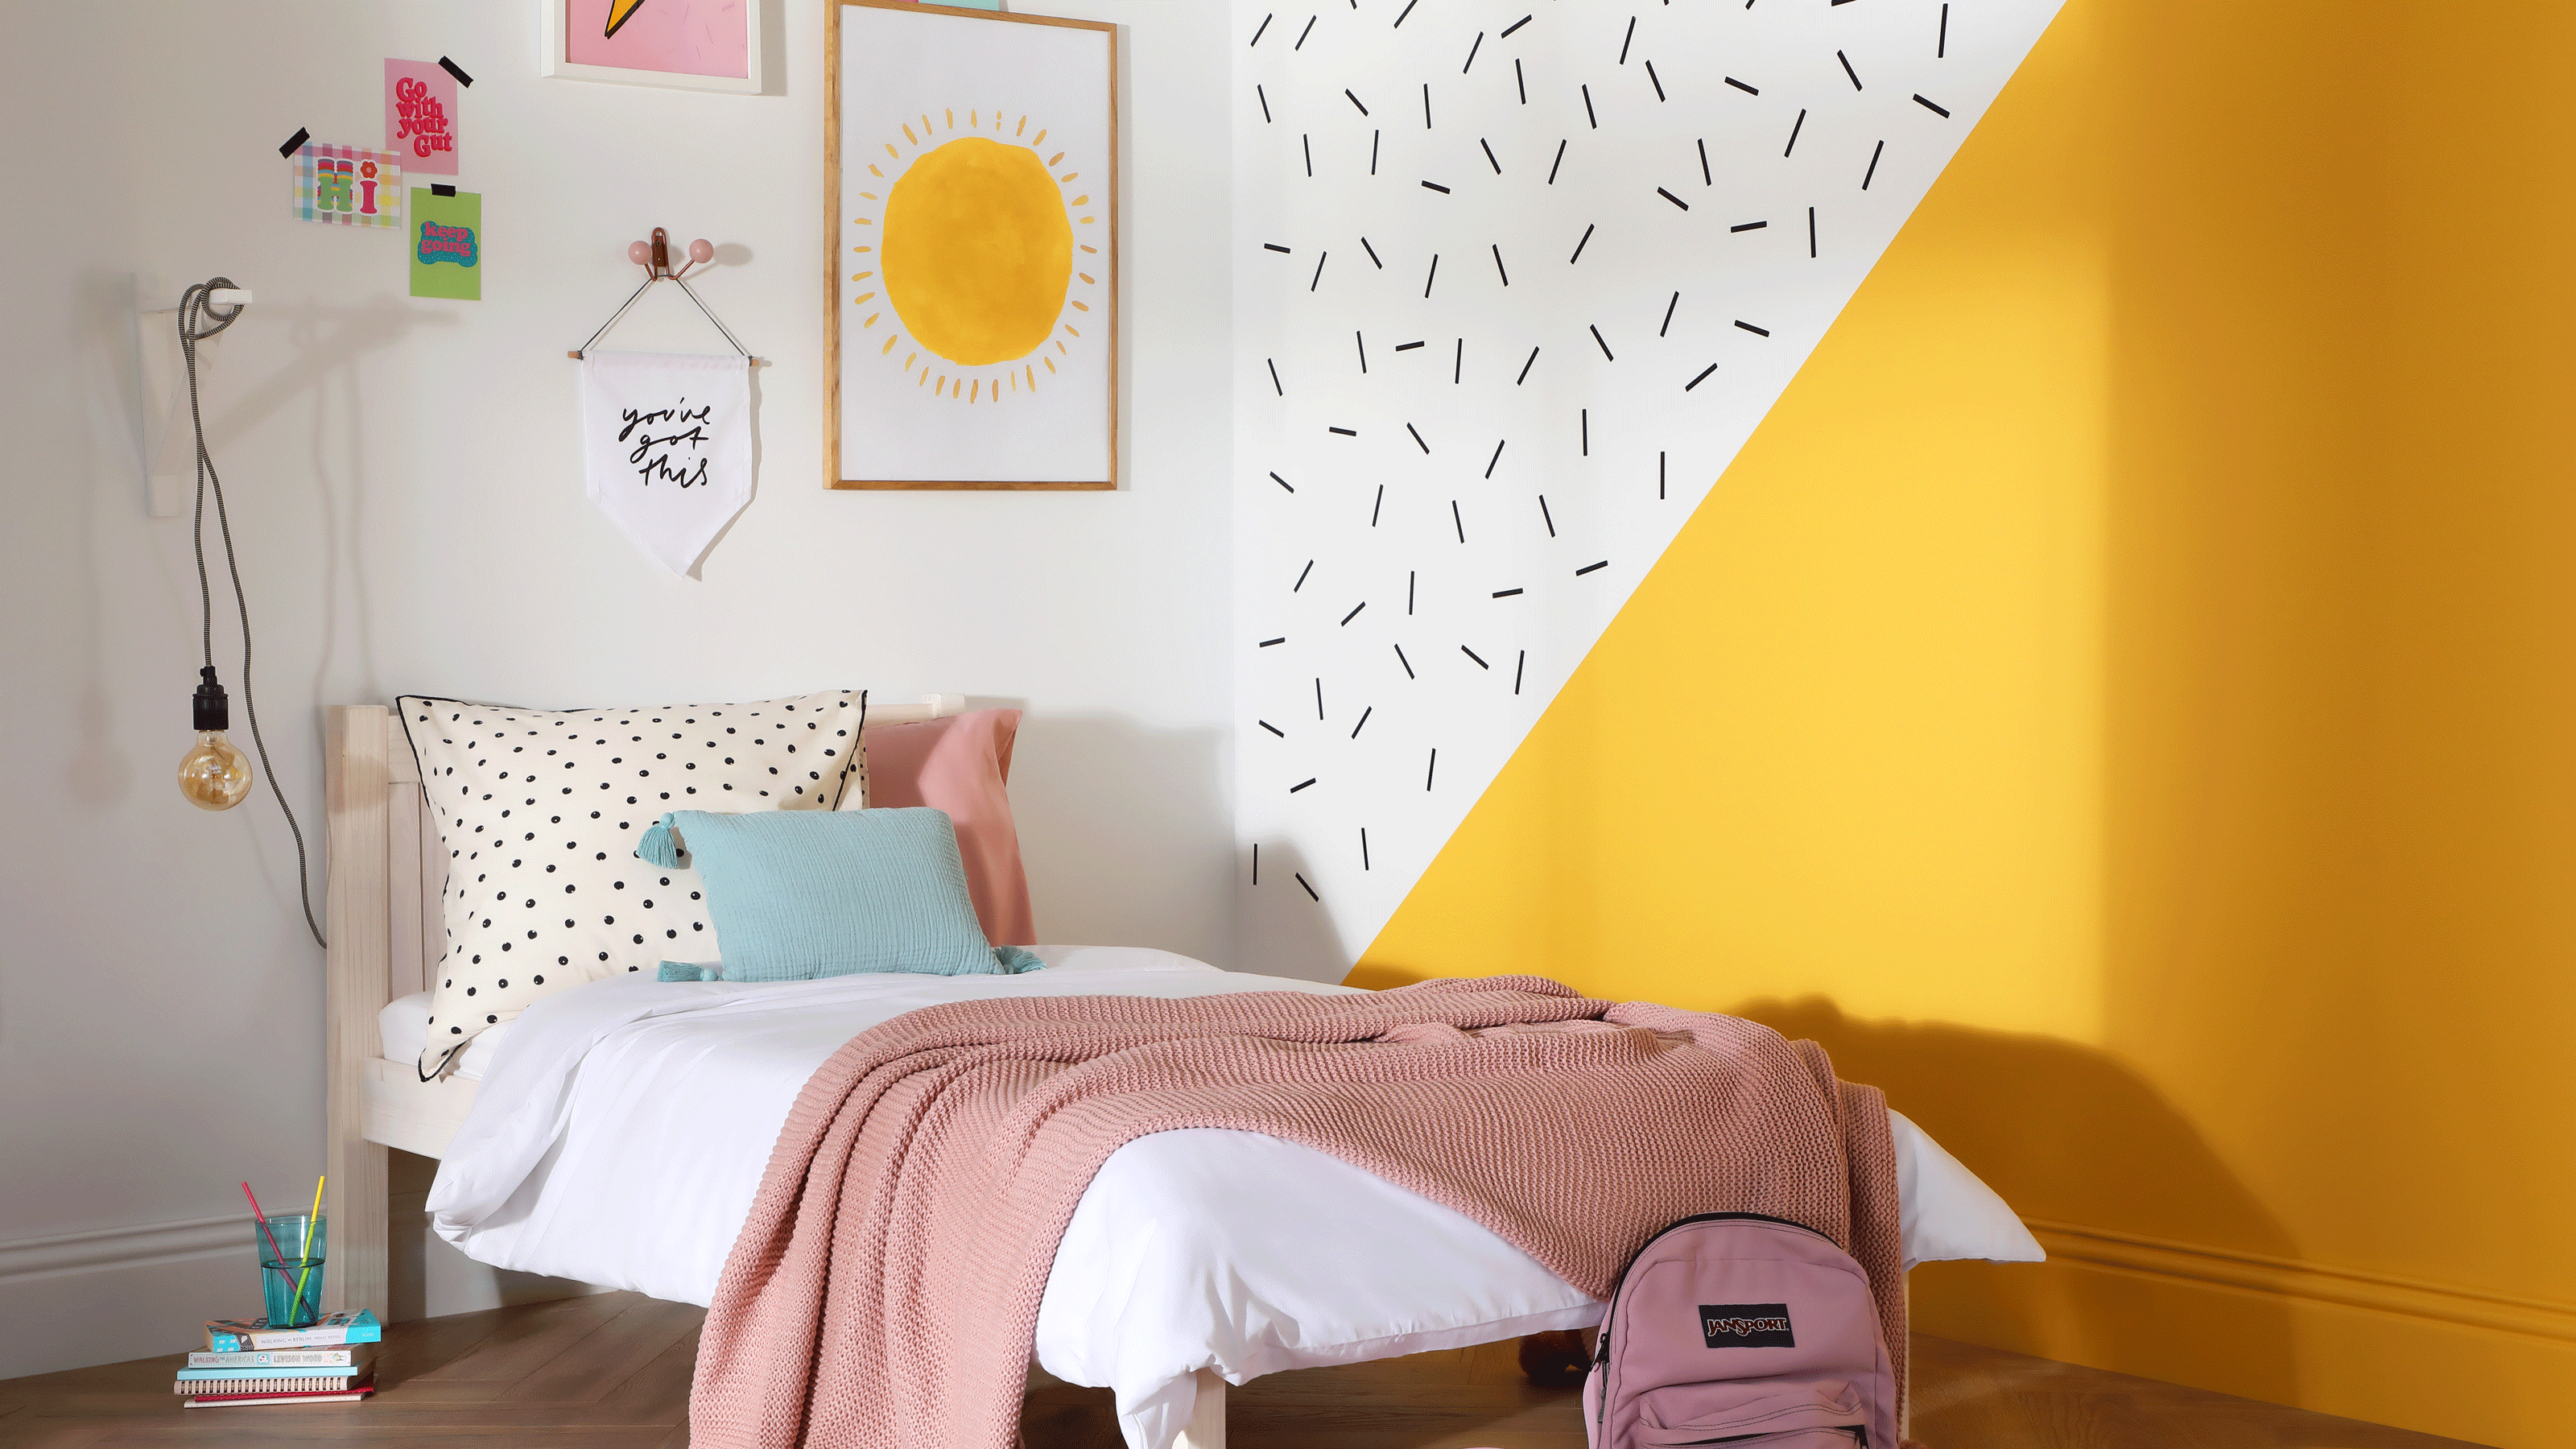 Wall Paint Design Ideas With Tape (10+ DIY Painting Projects)